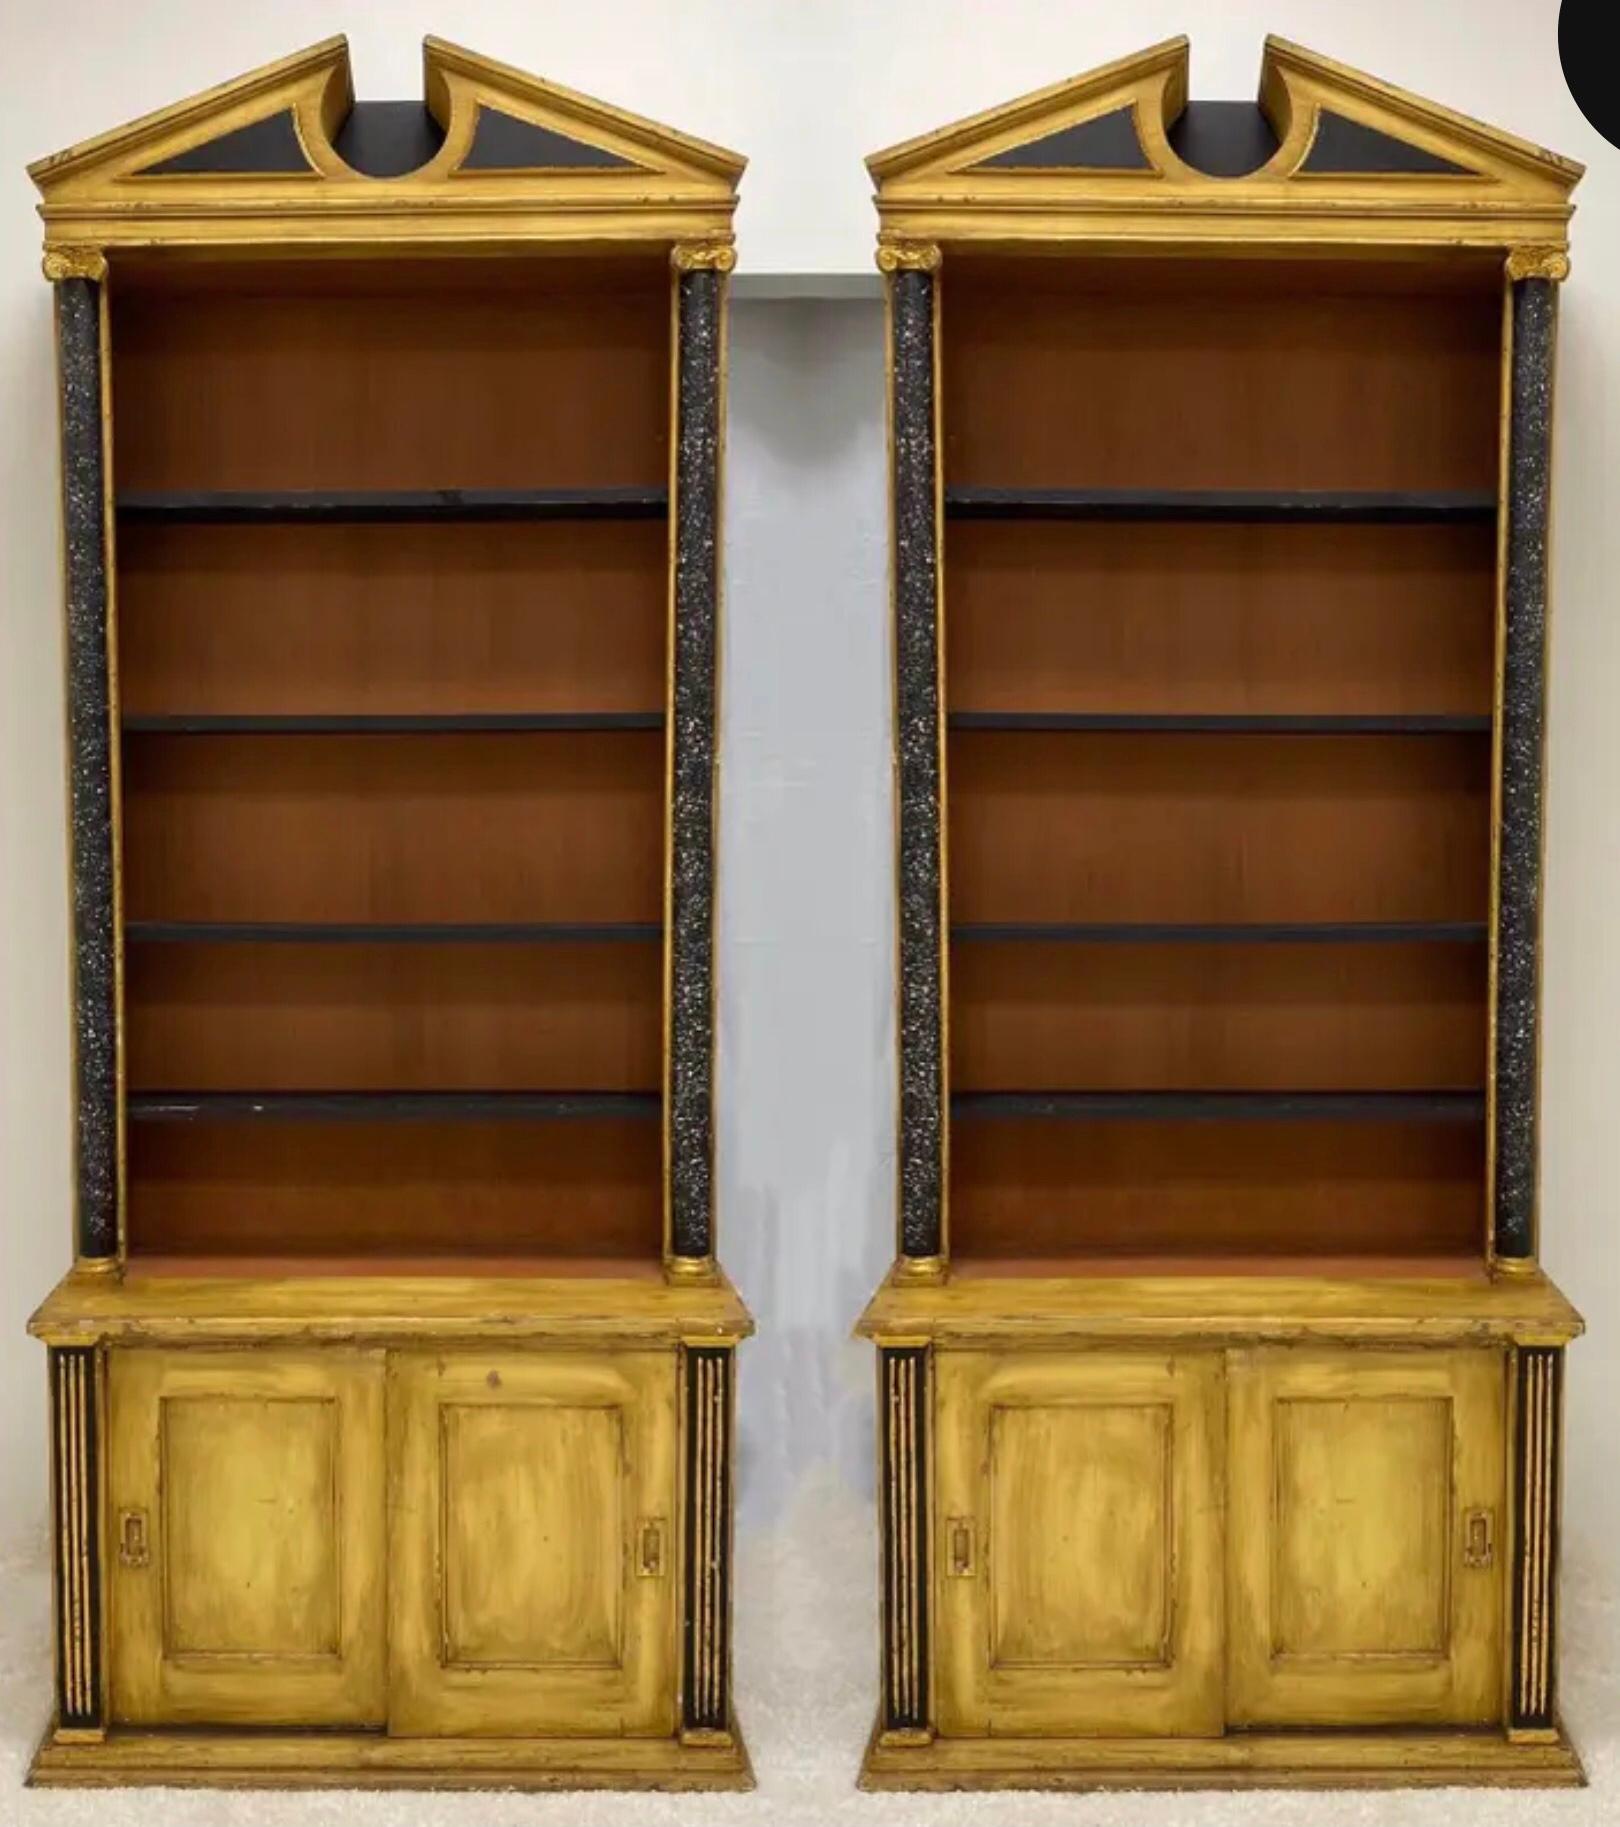 Poplar Early 20th Century Italian Painted Neo-Classical Bookcases, Pair